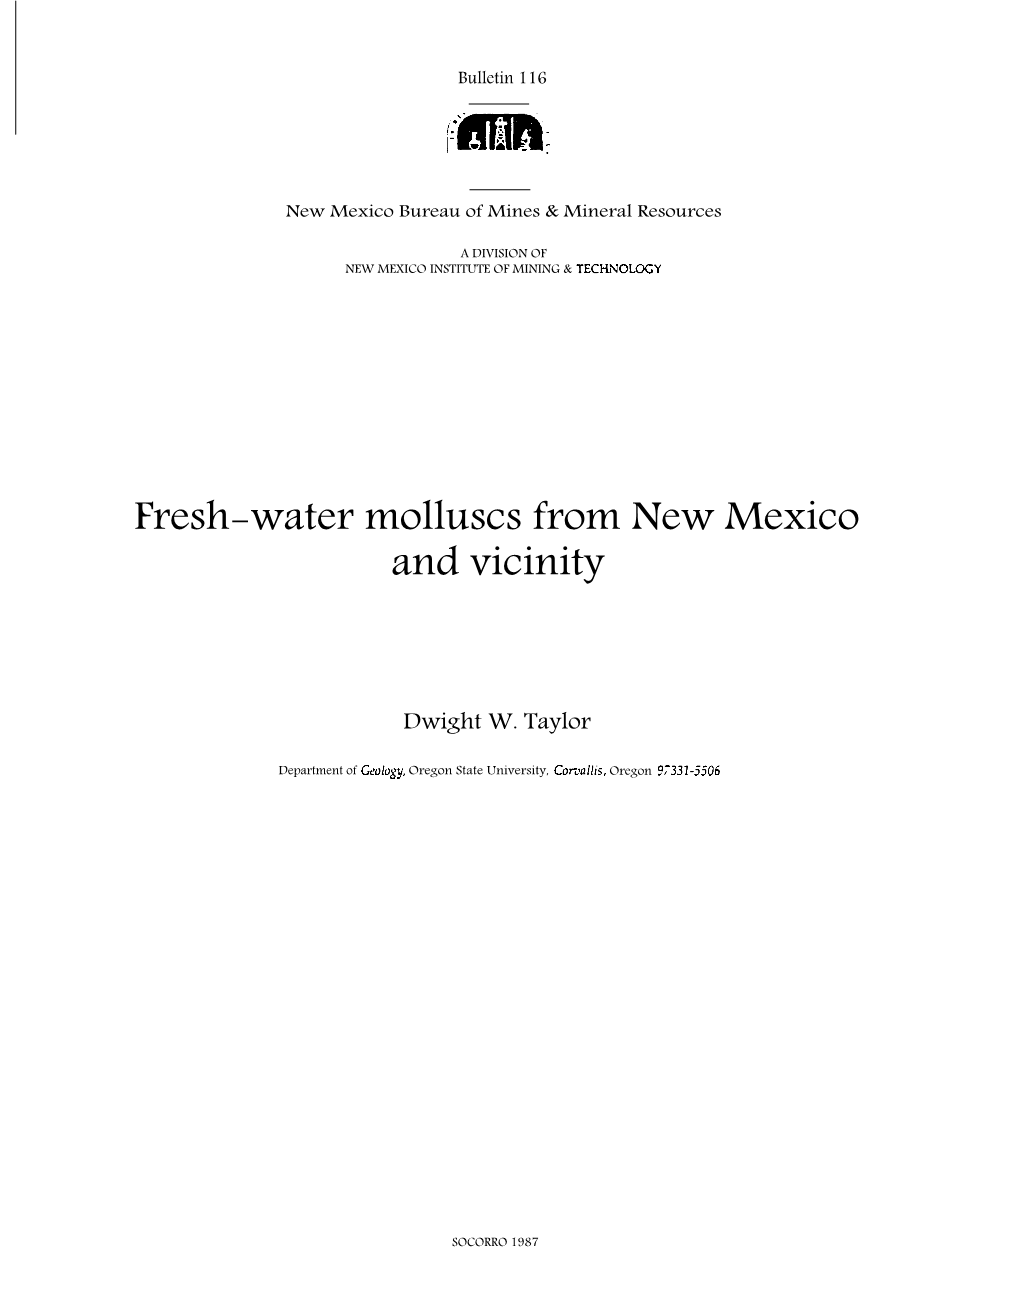 Fresh-Water Molluscs from New Mexico and Vicinity